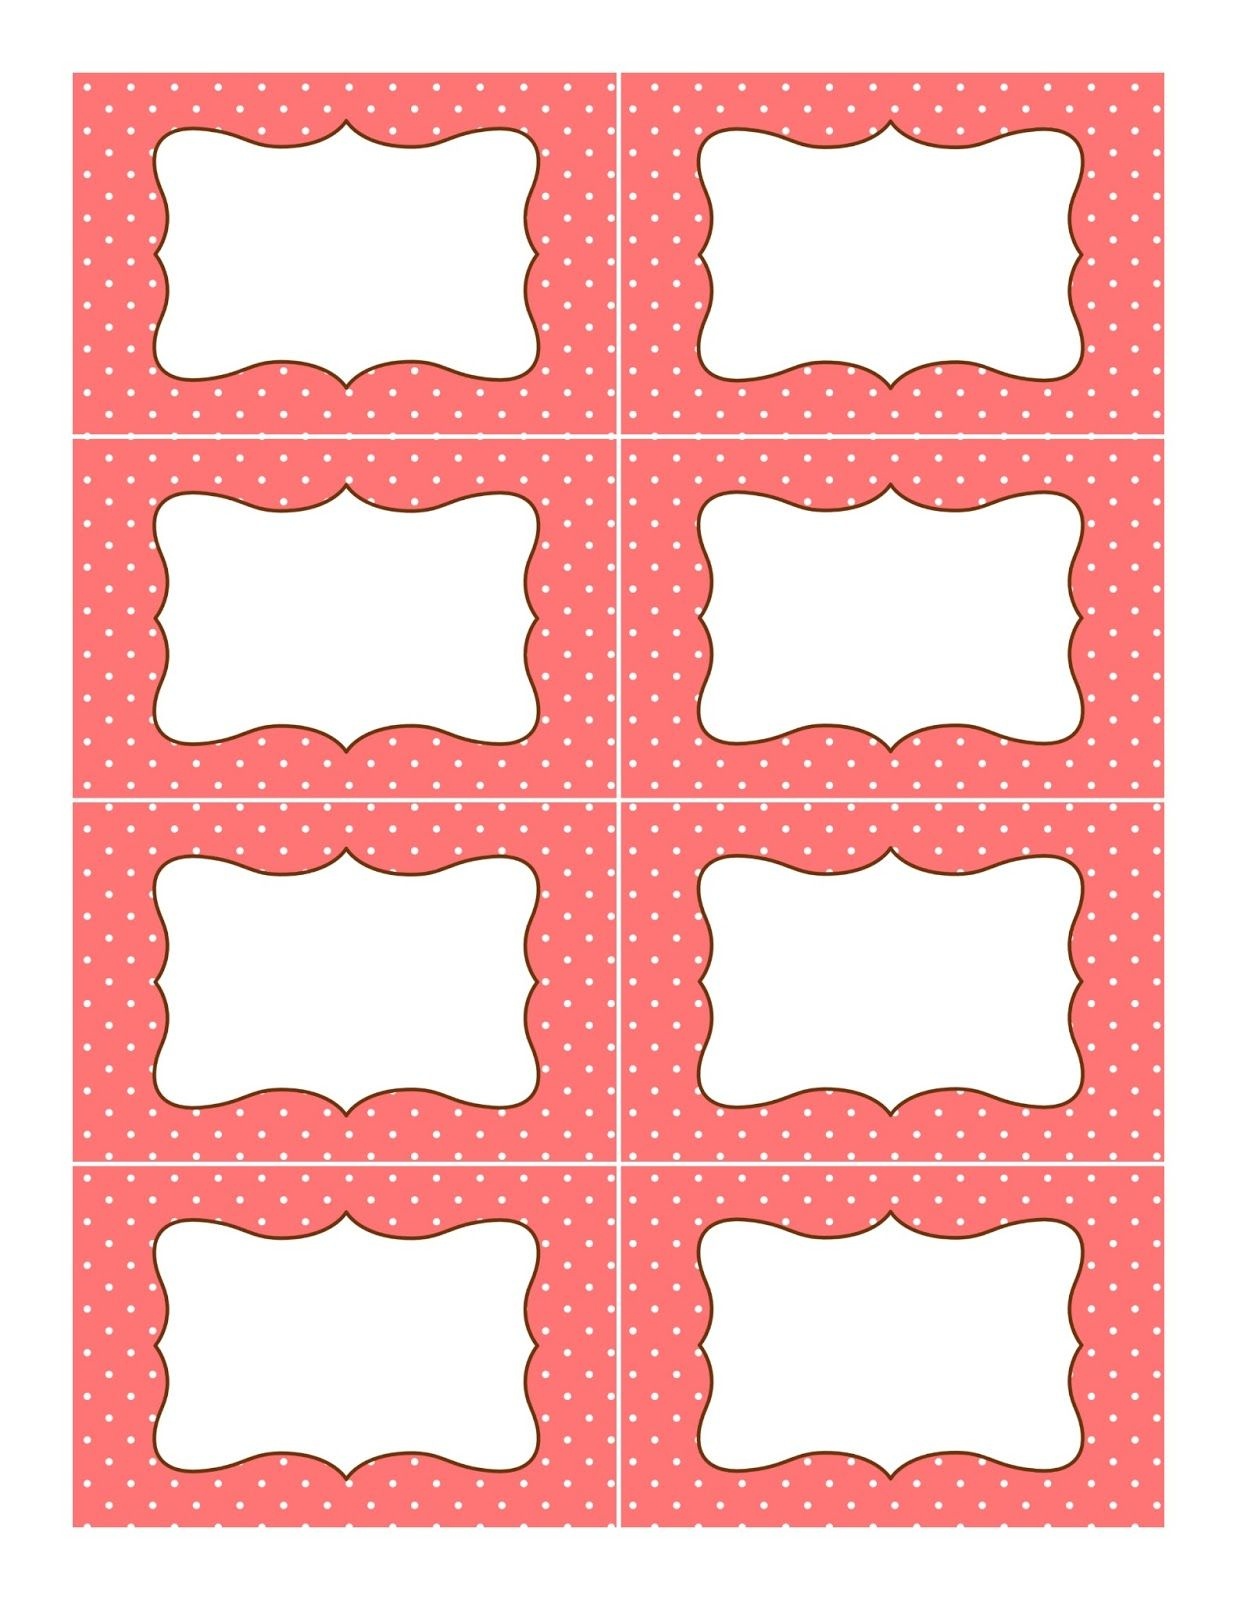  Free Printable Candy Buffet Labels Templates Free Printable